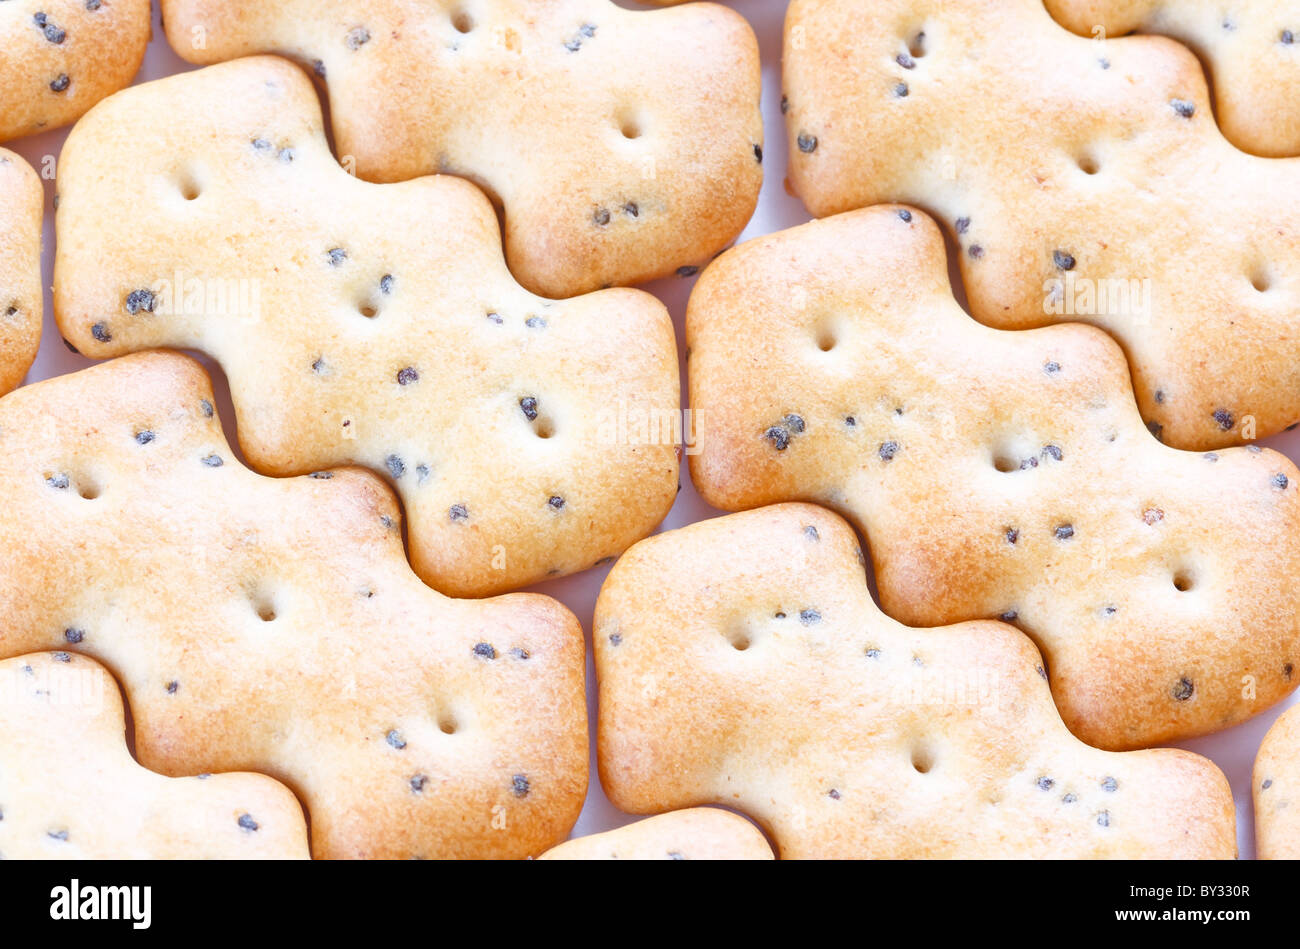 Small shaped browned crisp biscuits as tile background Stock Photo